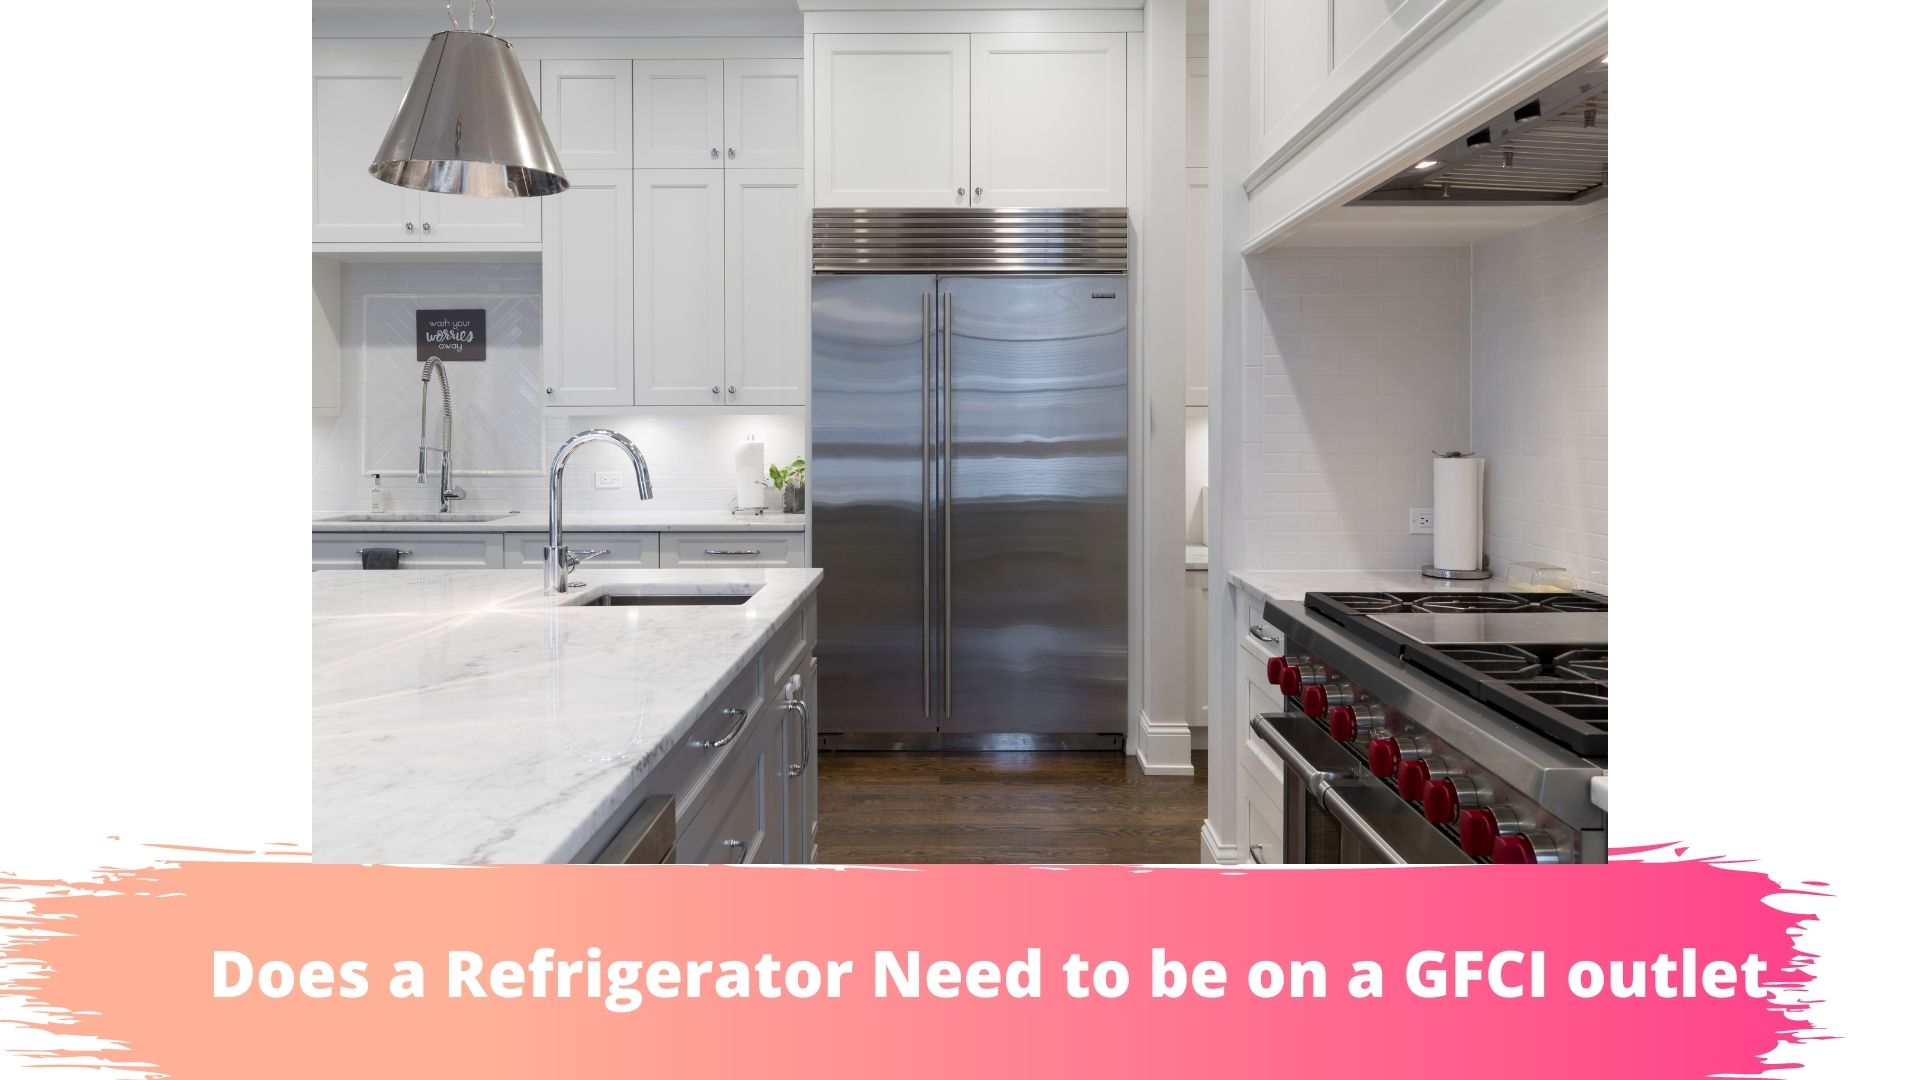 do refrigerators need to be on a gfci